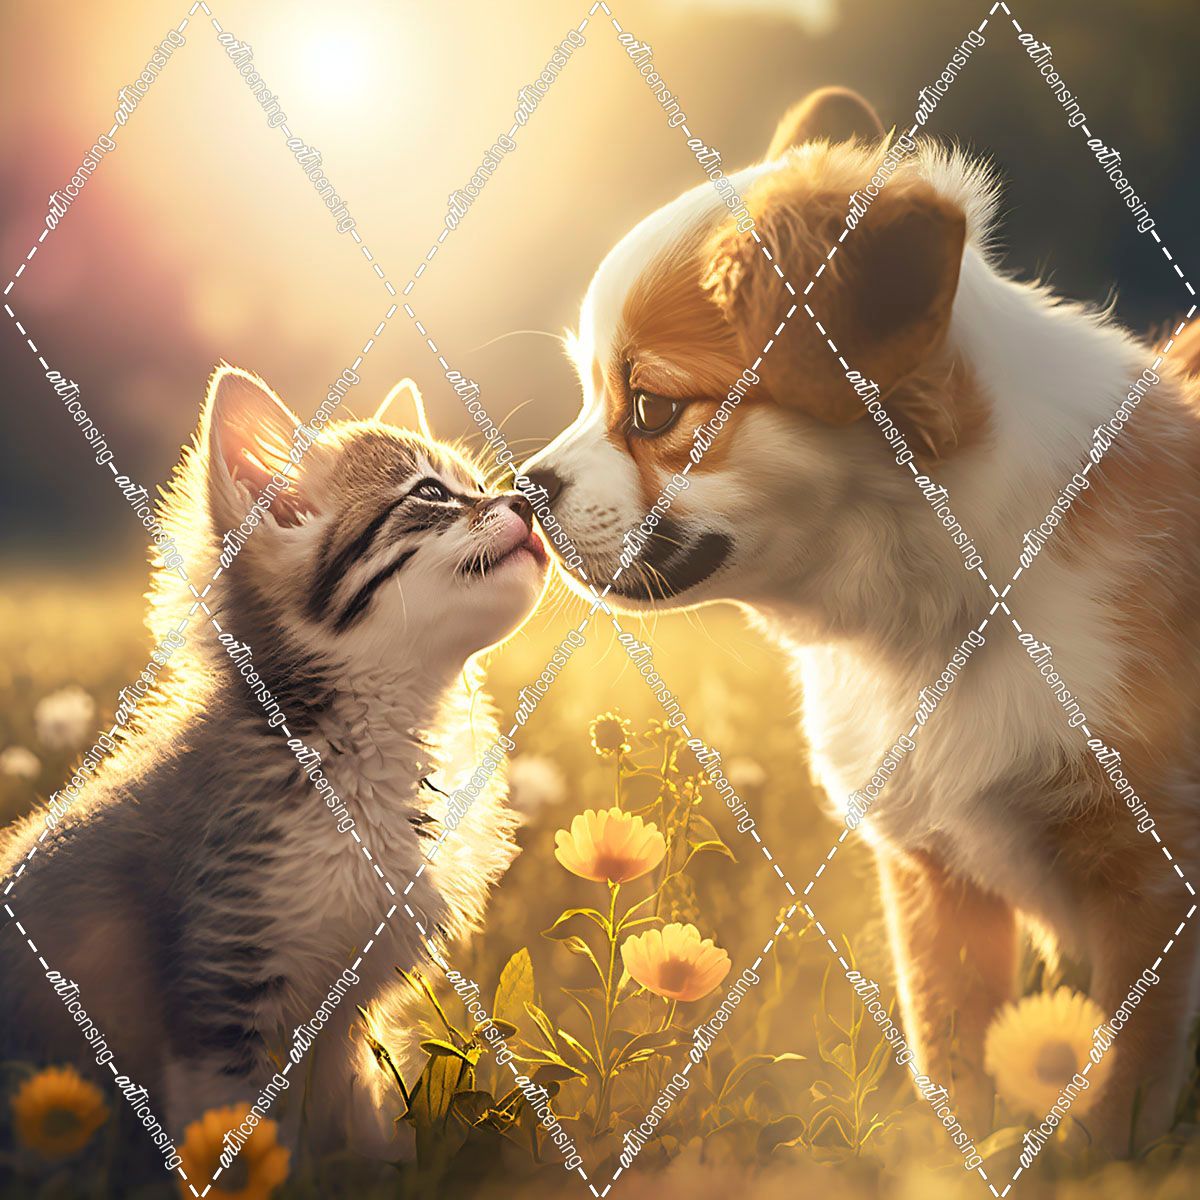 Cats And Dogs 33